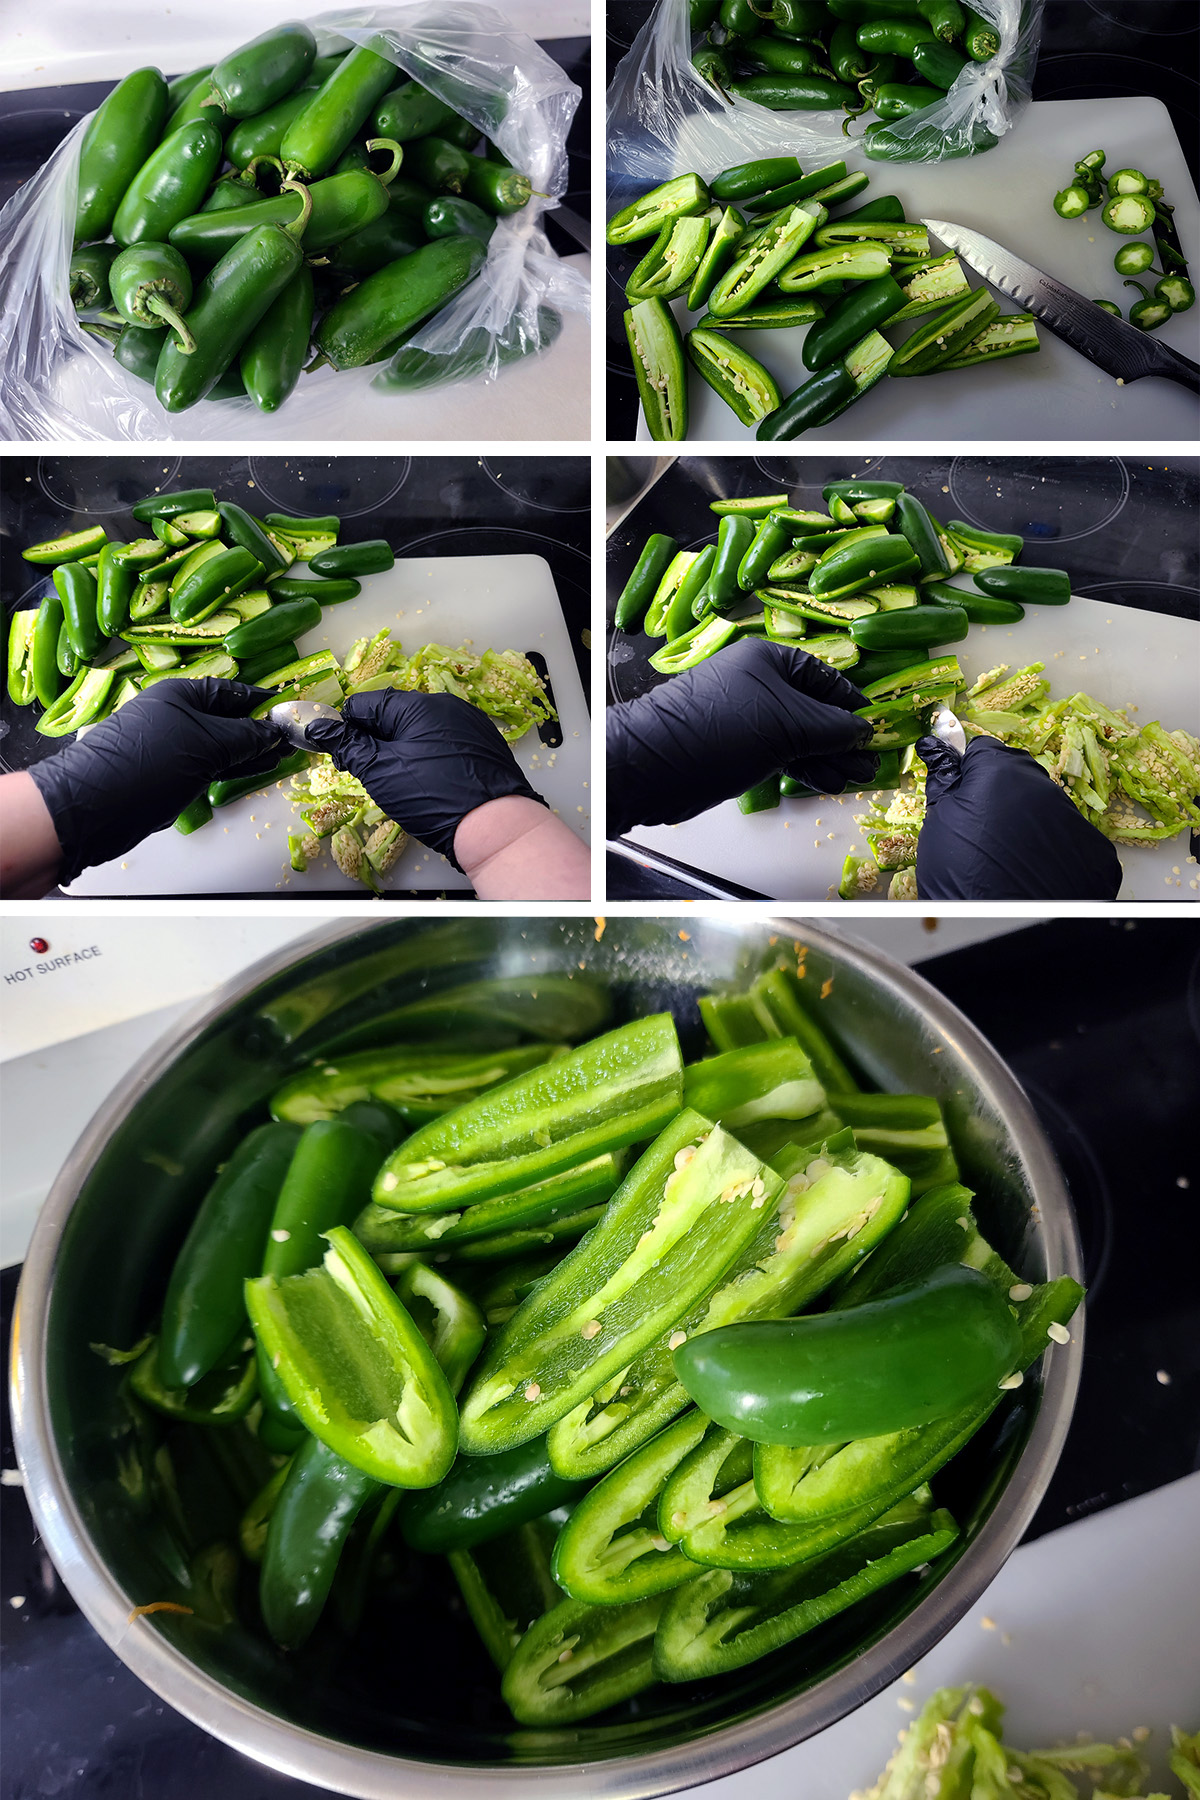 A 5 part image showing the jalapenos being sliced and cored.